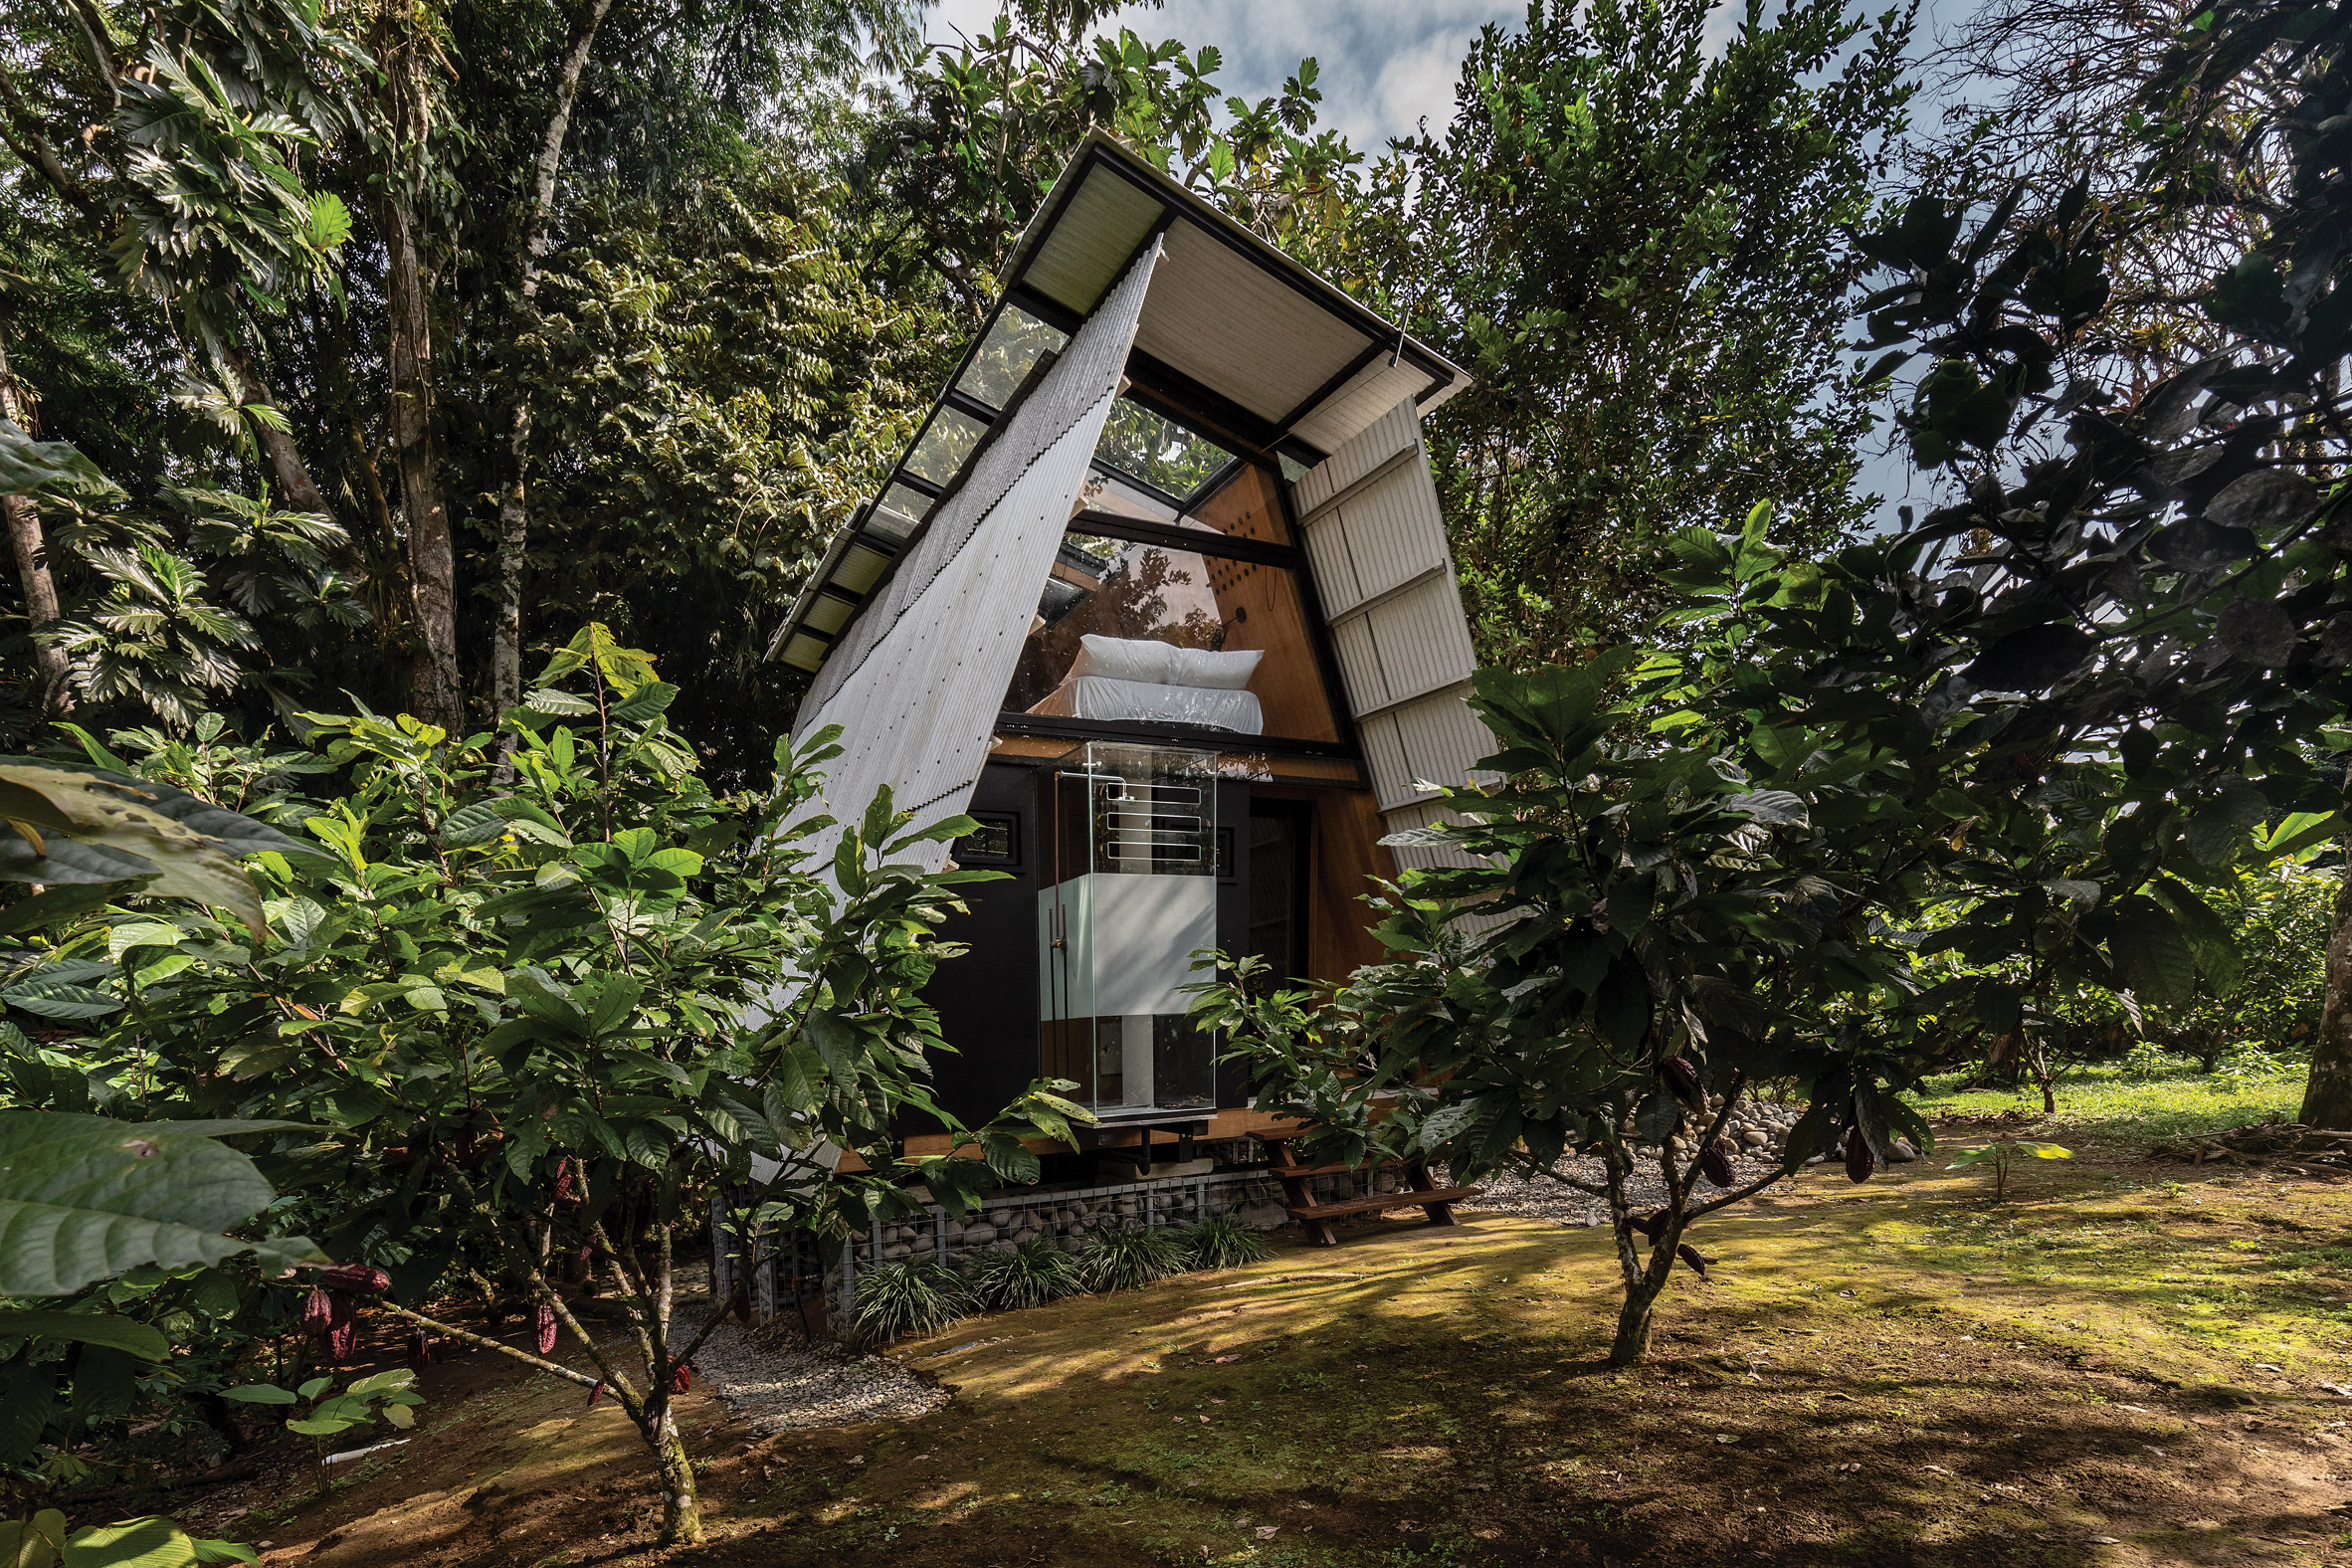 The front of the Huaira cabin by Diana Salvador and Javier Mera in Ecuador